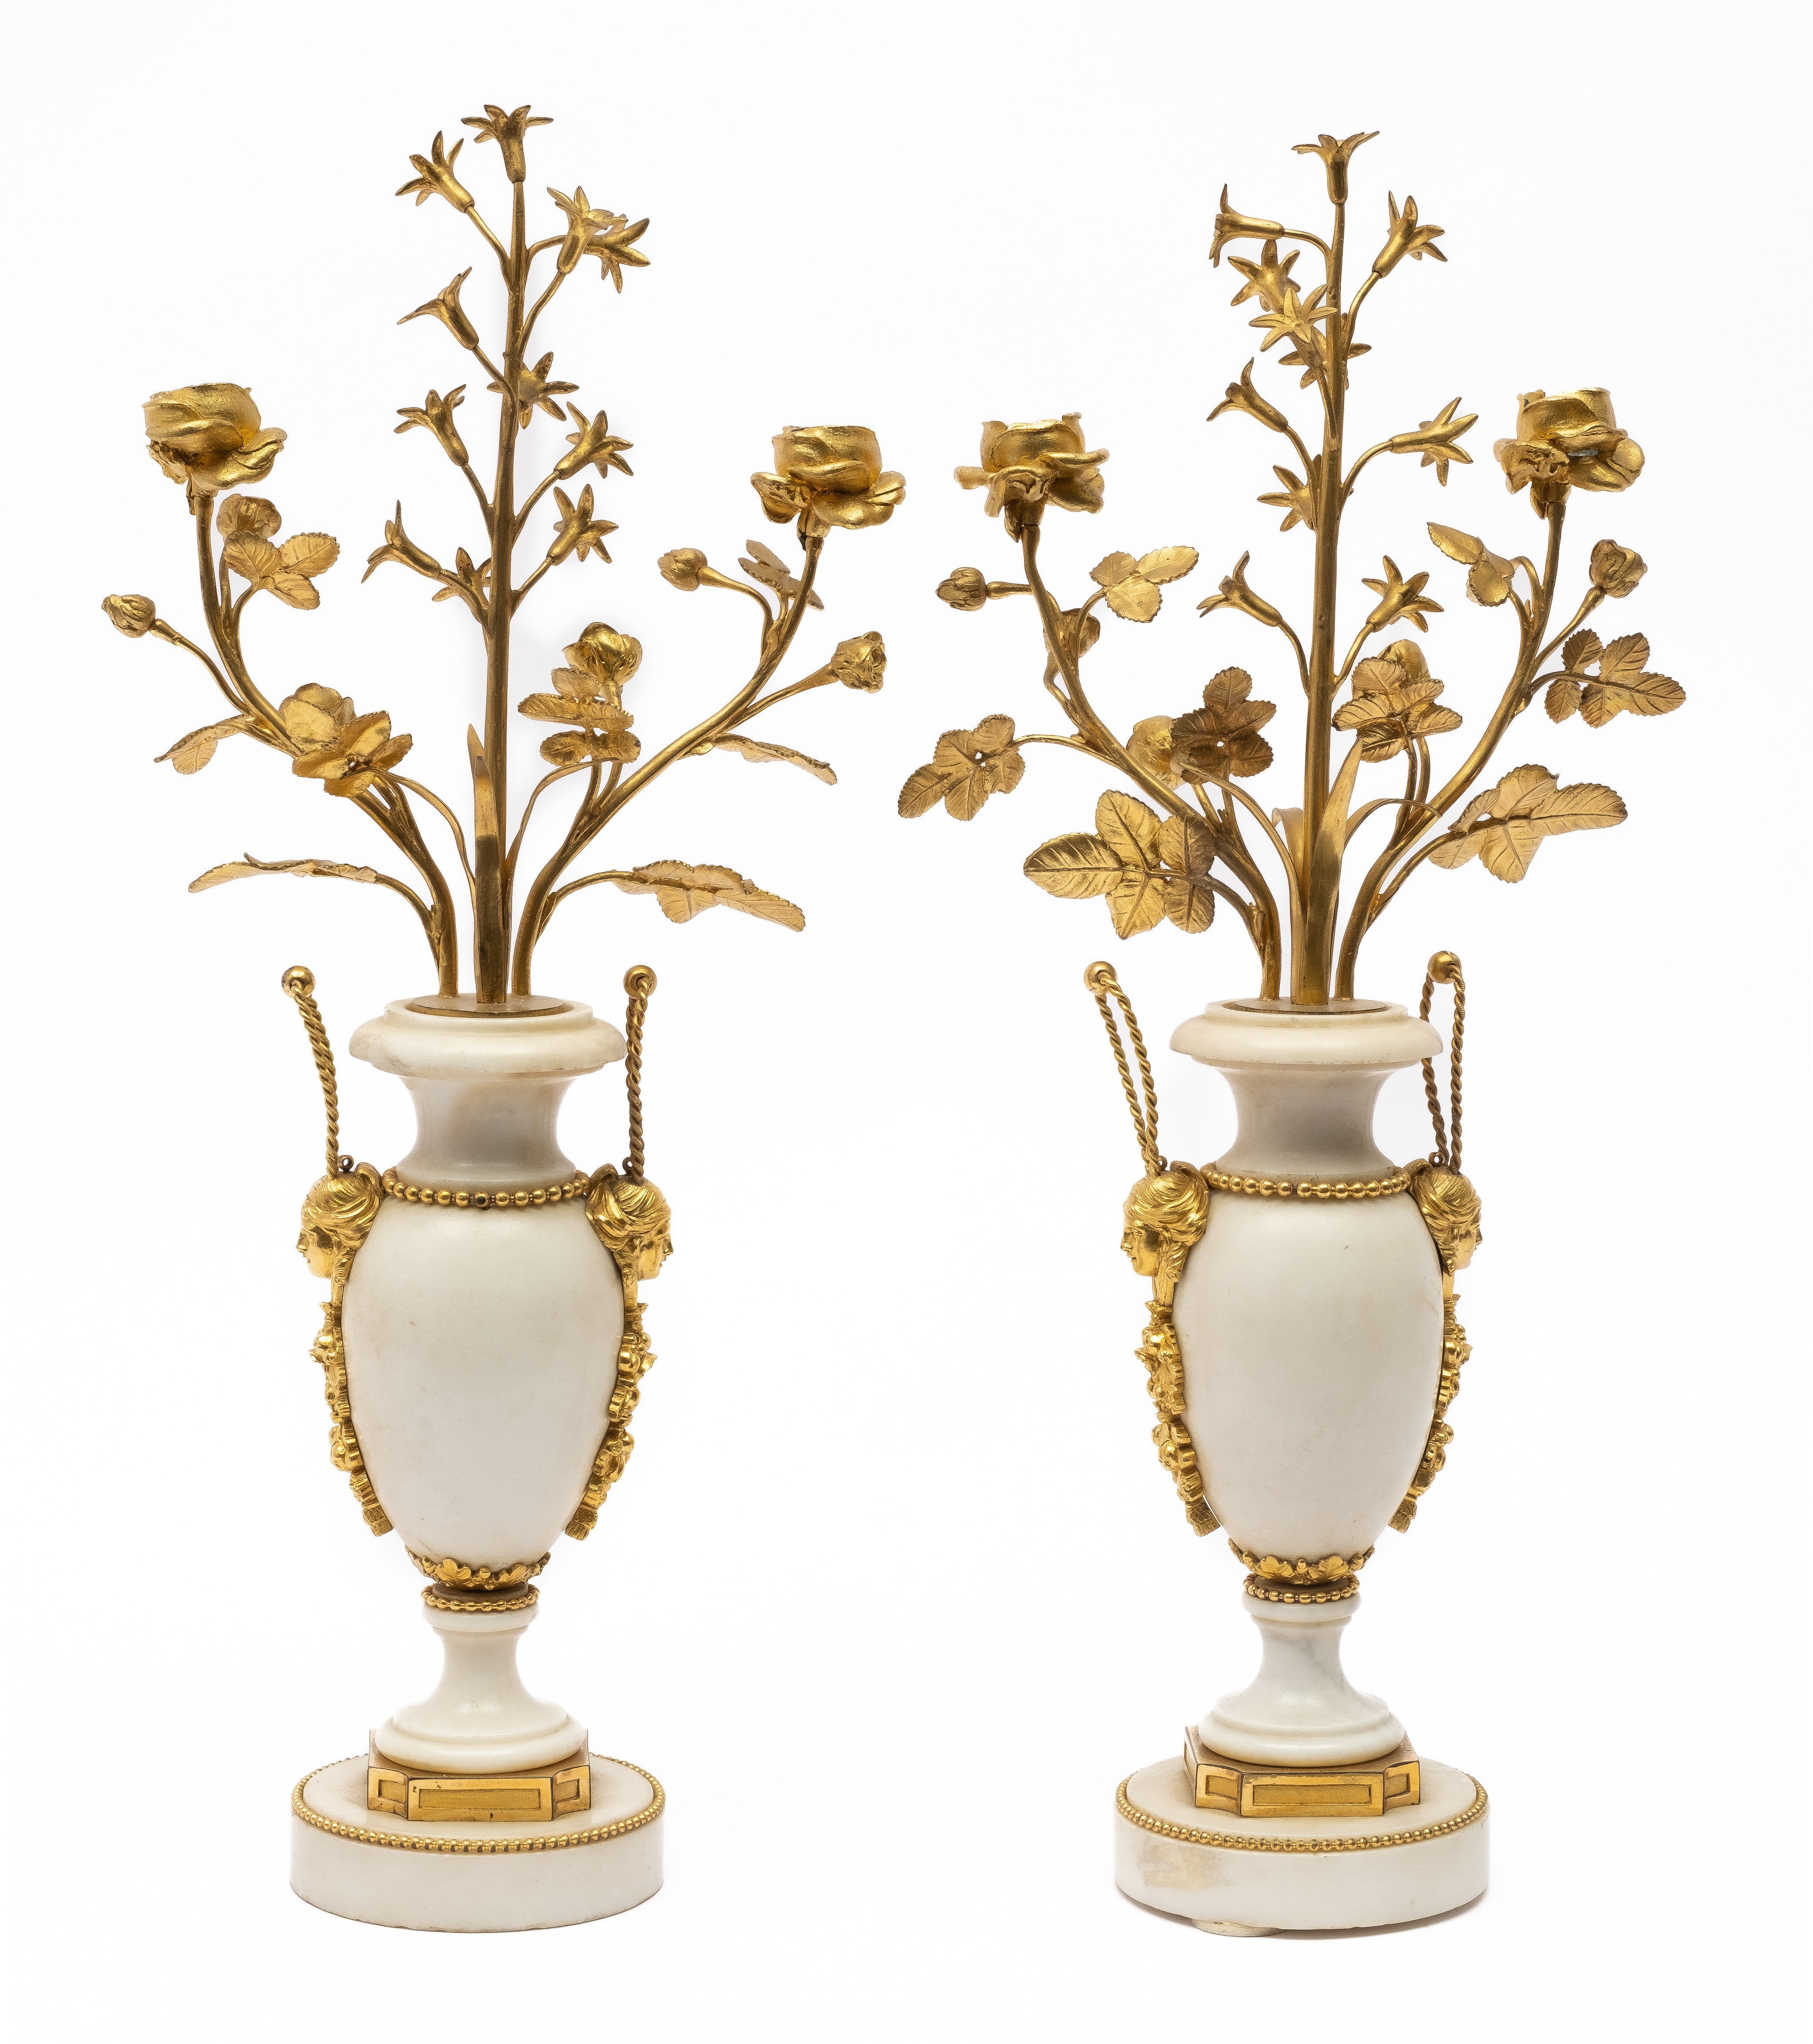 A pair of French ormolu-mounted white marble two-branch candelabra